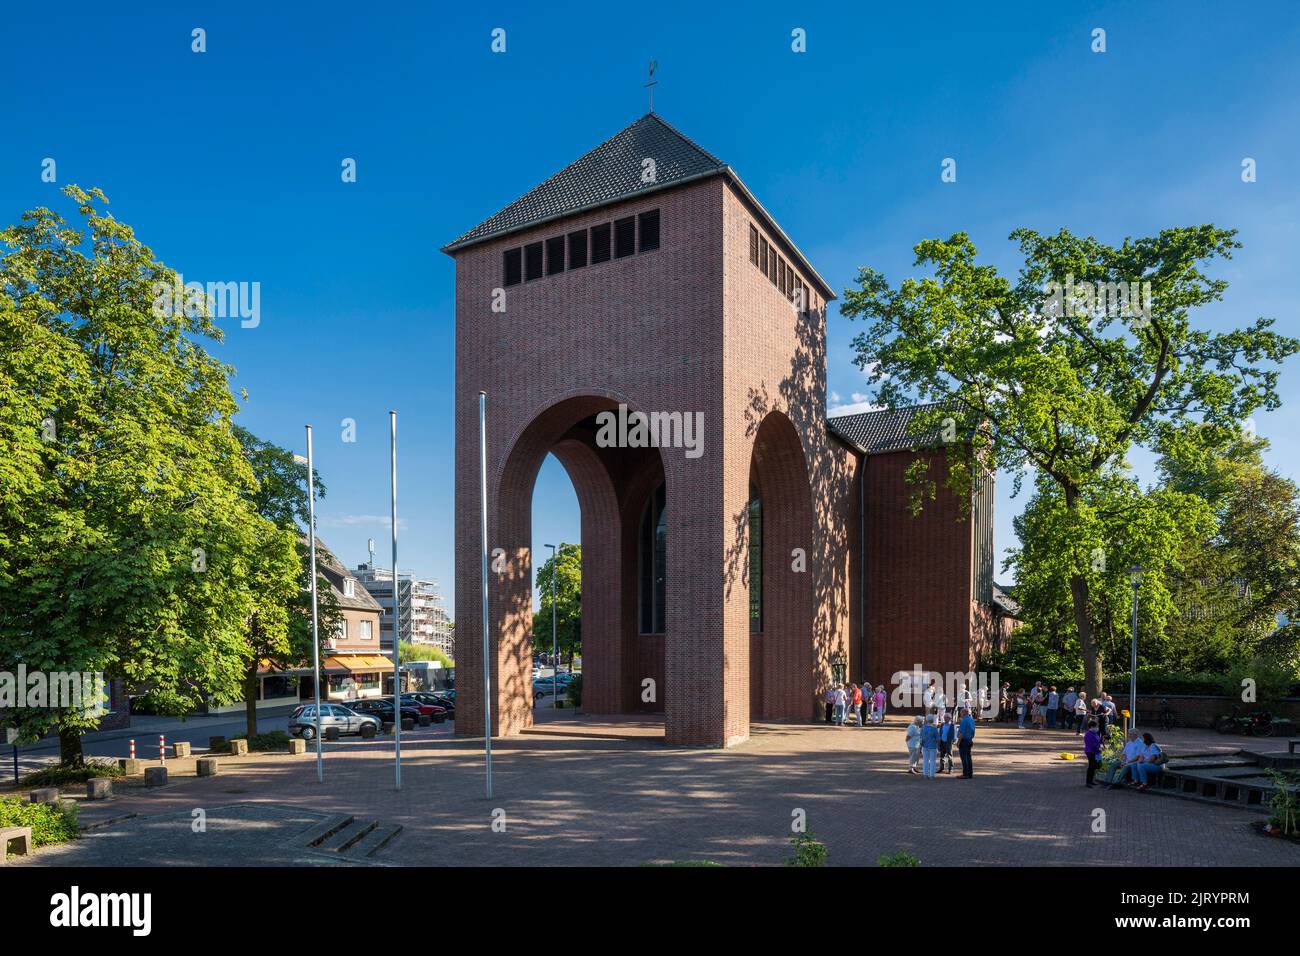 Germany, Bocholt, Lower Rhine, Westmuensterland, Muensterland, Westphalia, North Rhine-Westphalia, NRW, Catholic Church Holy Cross by Dominikus Boehm, basilica with stilts tower, brick building, people on the courtyard wait for the liturgy Stock Photo